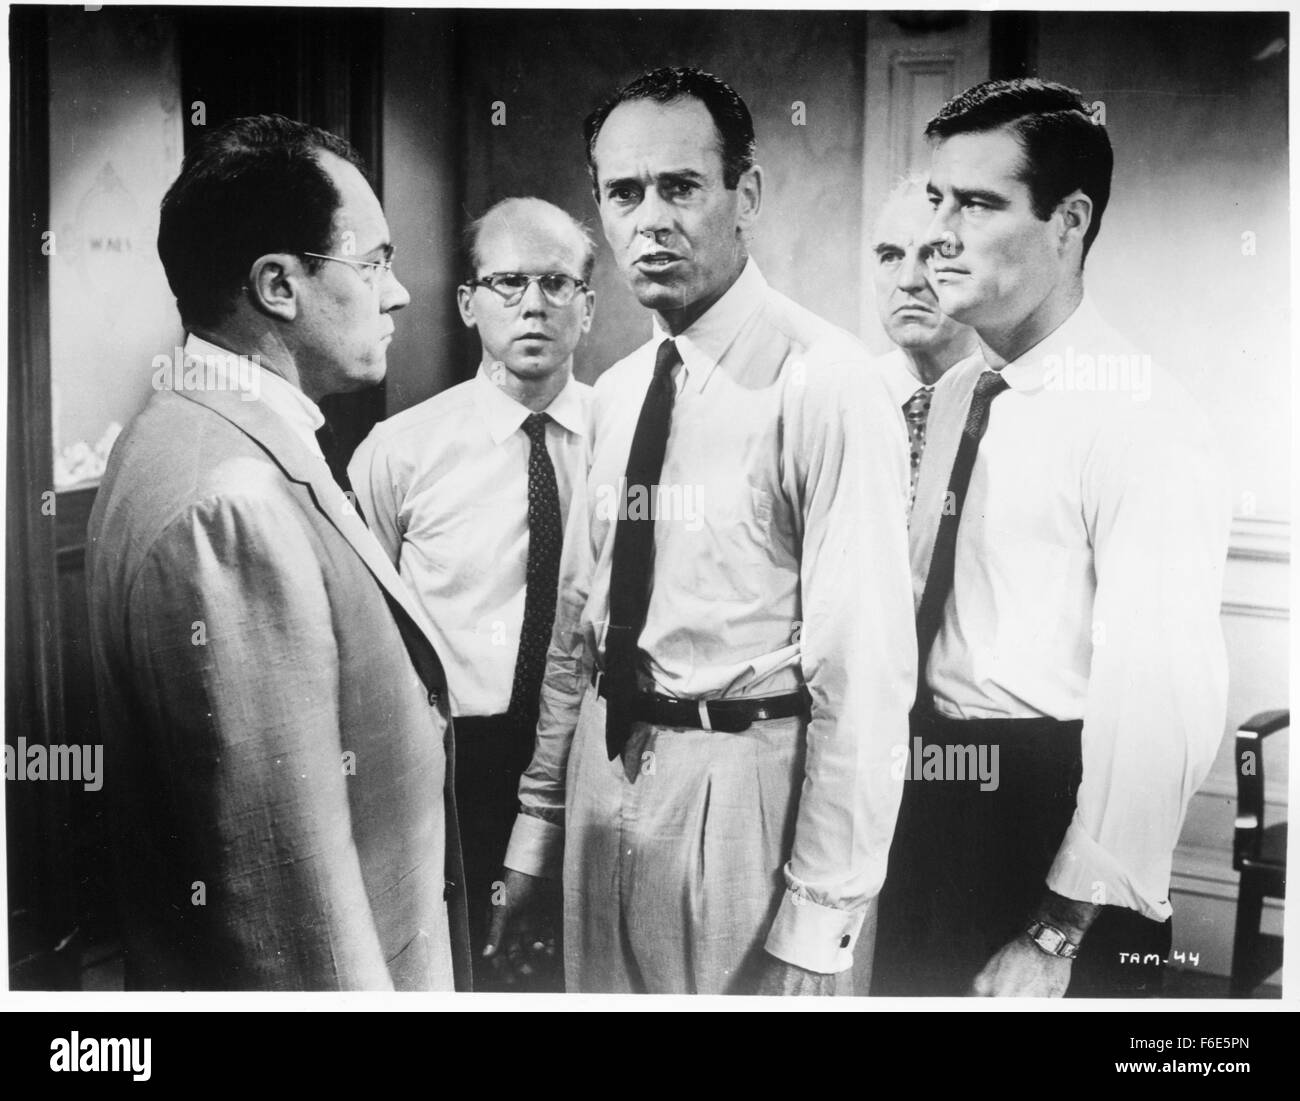 RELEASE DATE: July 29, 1957. MOVIE TITLE: 12 Angry Men. STUDIO: Orion-Nova Productions. PLOT: The defence and the prosecution have rested and the jury is filing into the jury room to decide if a young Spanish-American is guilty or innocent of murdering his father. What begins as an open and shut case of murder soon becomes a mini-drama of each of the jurors' prejudices and preconceptions about the trial, the accused, and each other. Based on the play, all of the action takes place on the stage of the jury room. PICTURED: HENRY FONDA as Juror Stock Photo